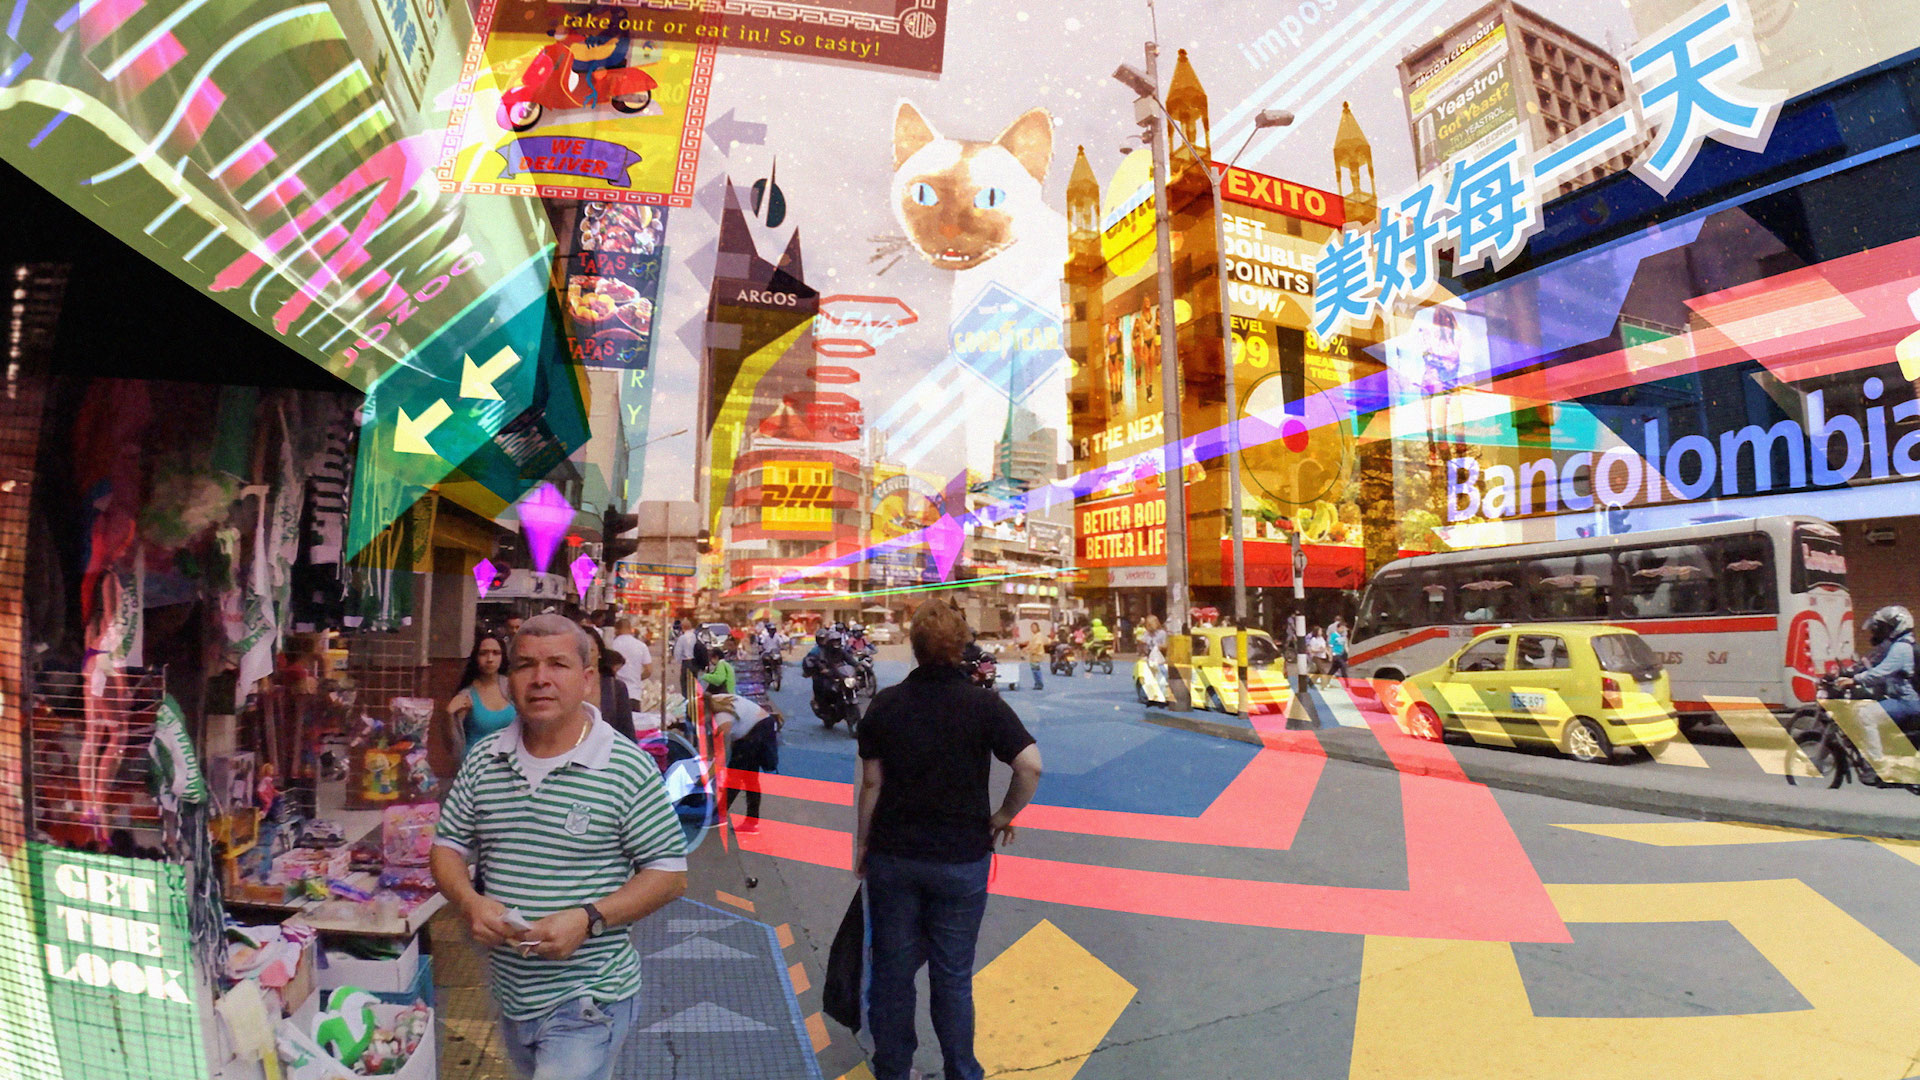 hyper-reality by Keiichi Matsuda, busy street with neon AR signs